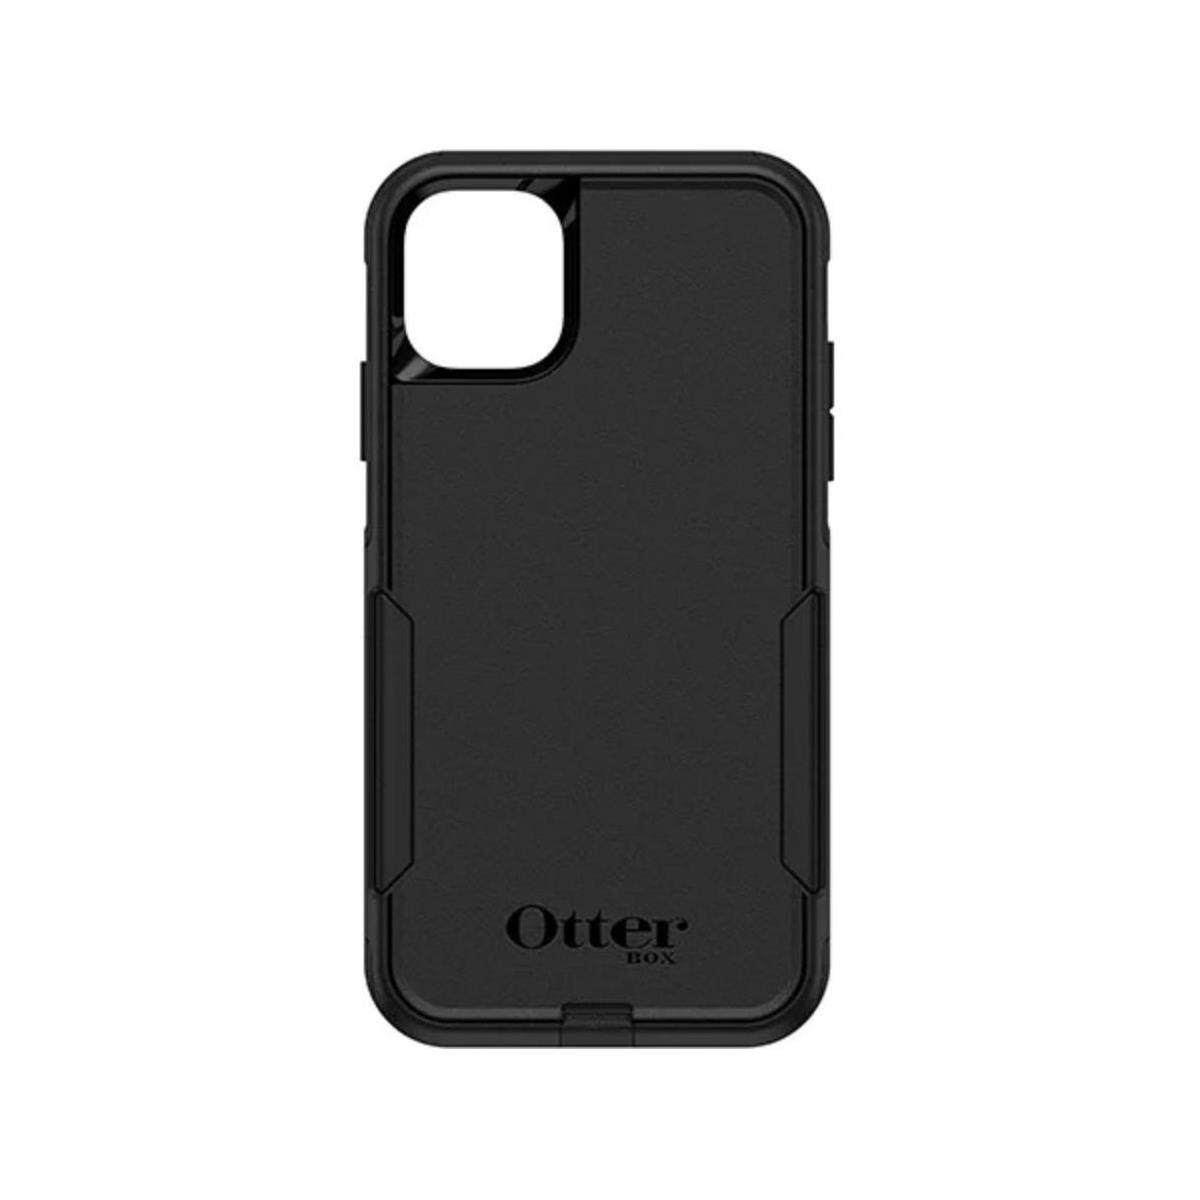 Image of OtterBox Commuter Case for iPhone 11